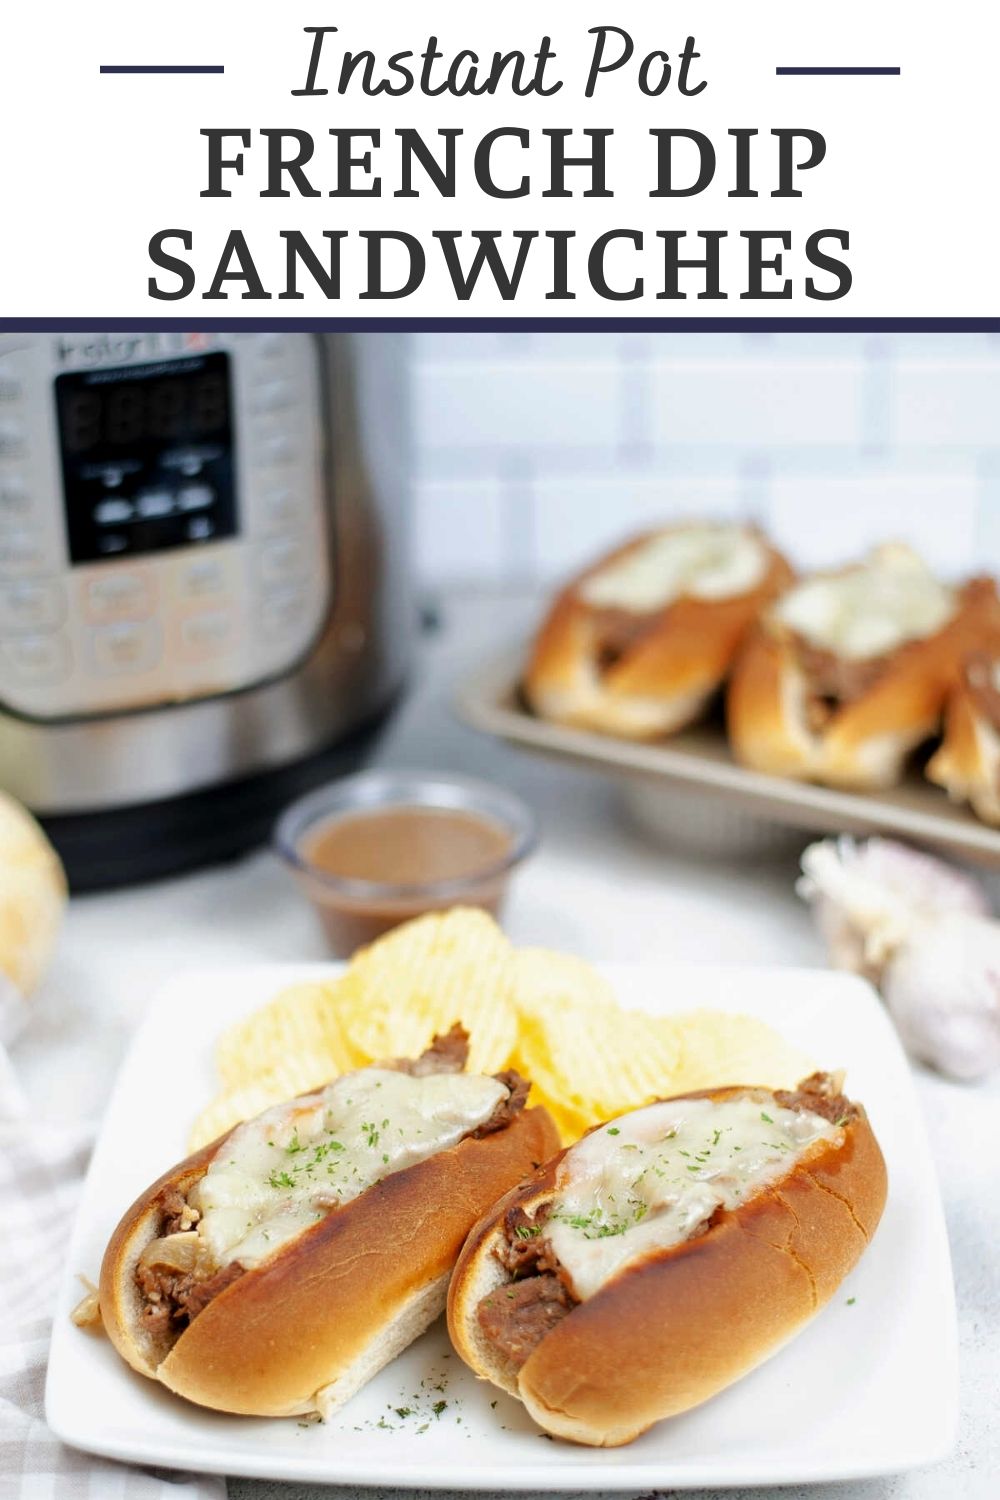 Make super simple French dip sandwiches in the instant pot for a deceptively easy dinner. It is a quick way to make a delicious roast beef sandwich with yummy gravy for dipping if desired.